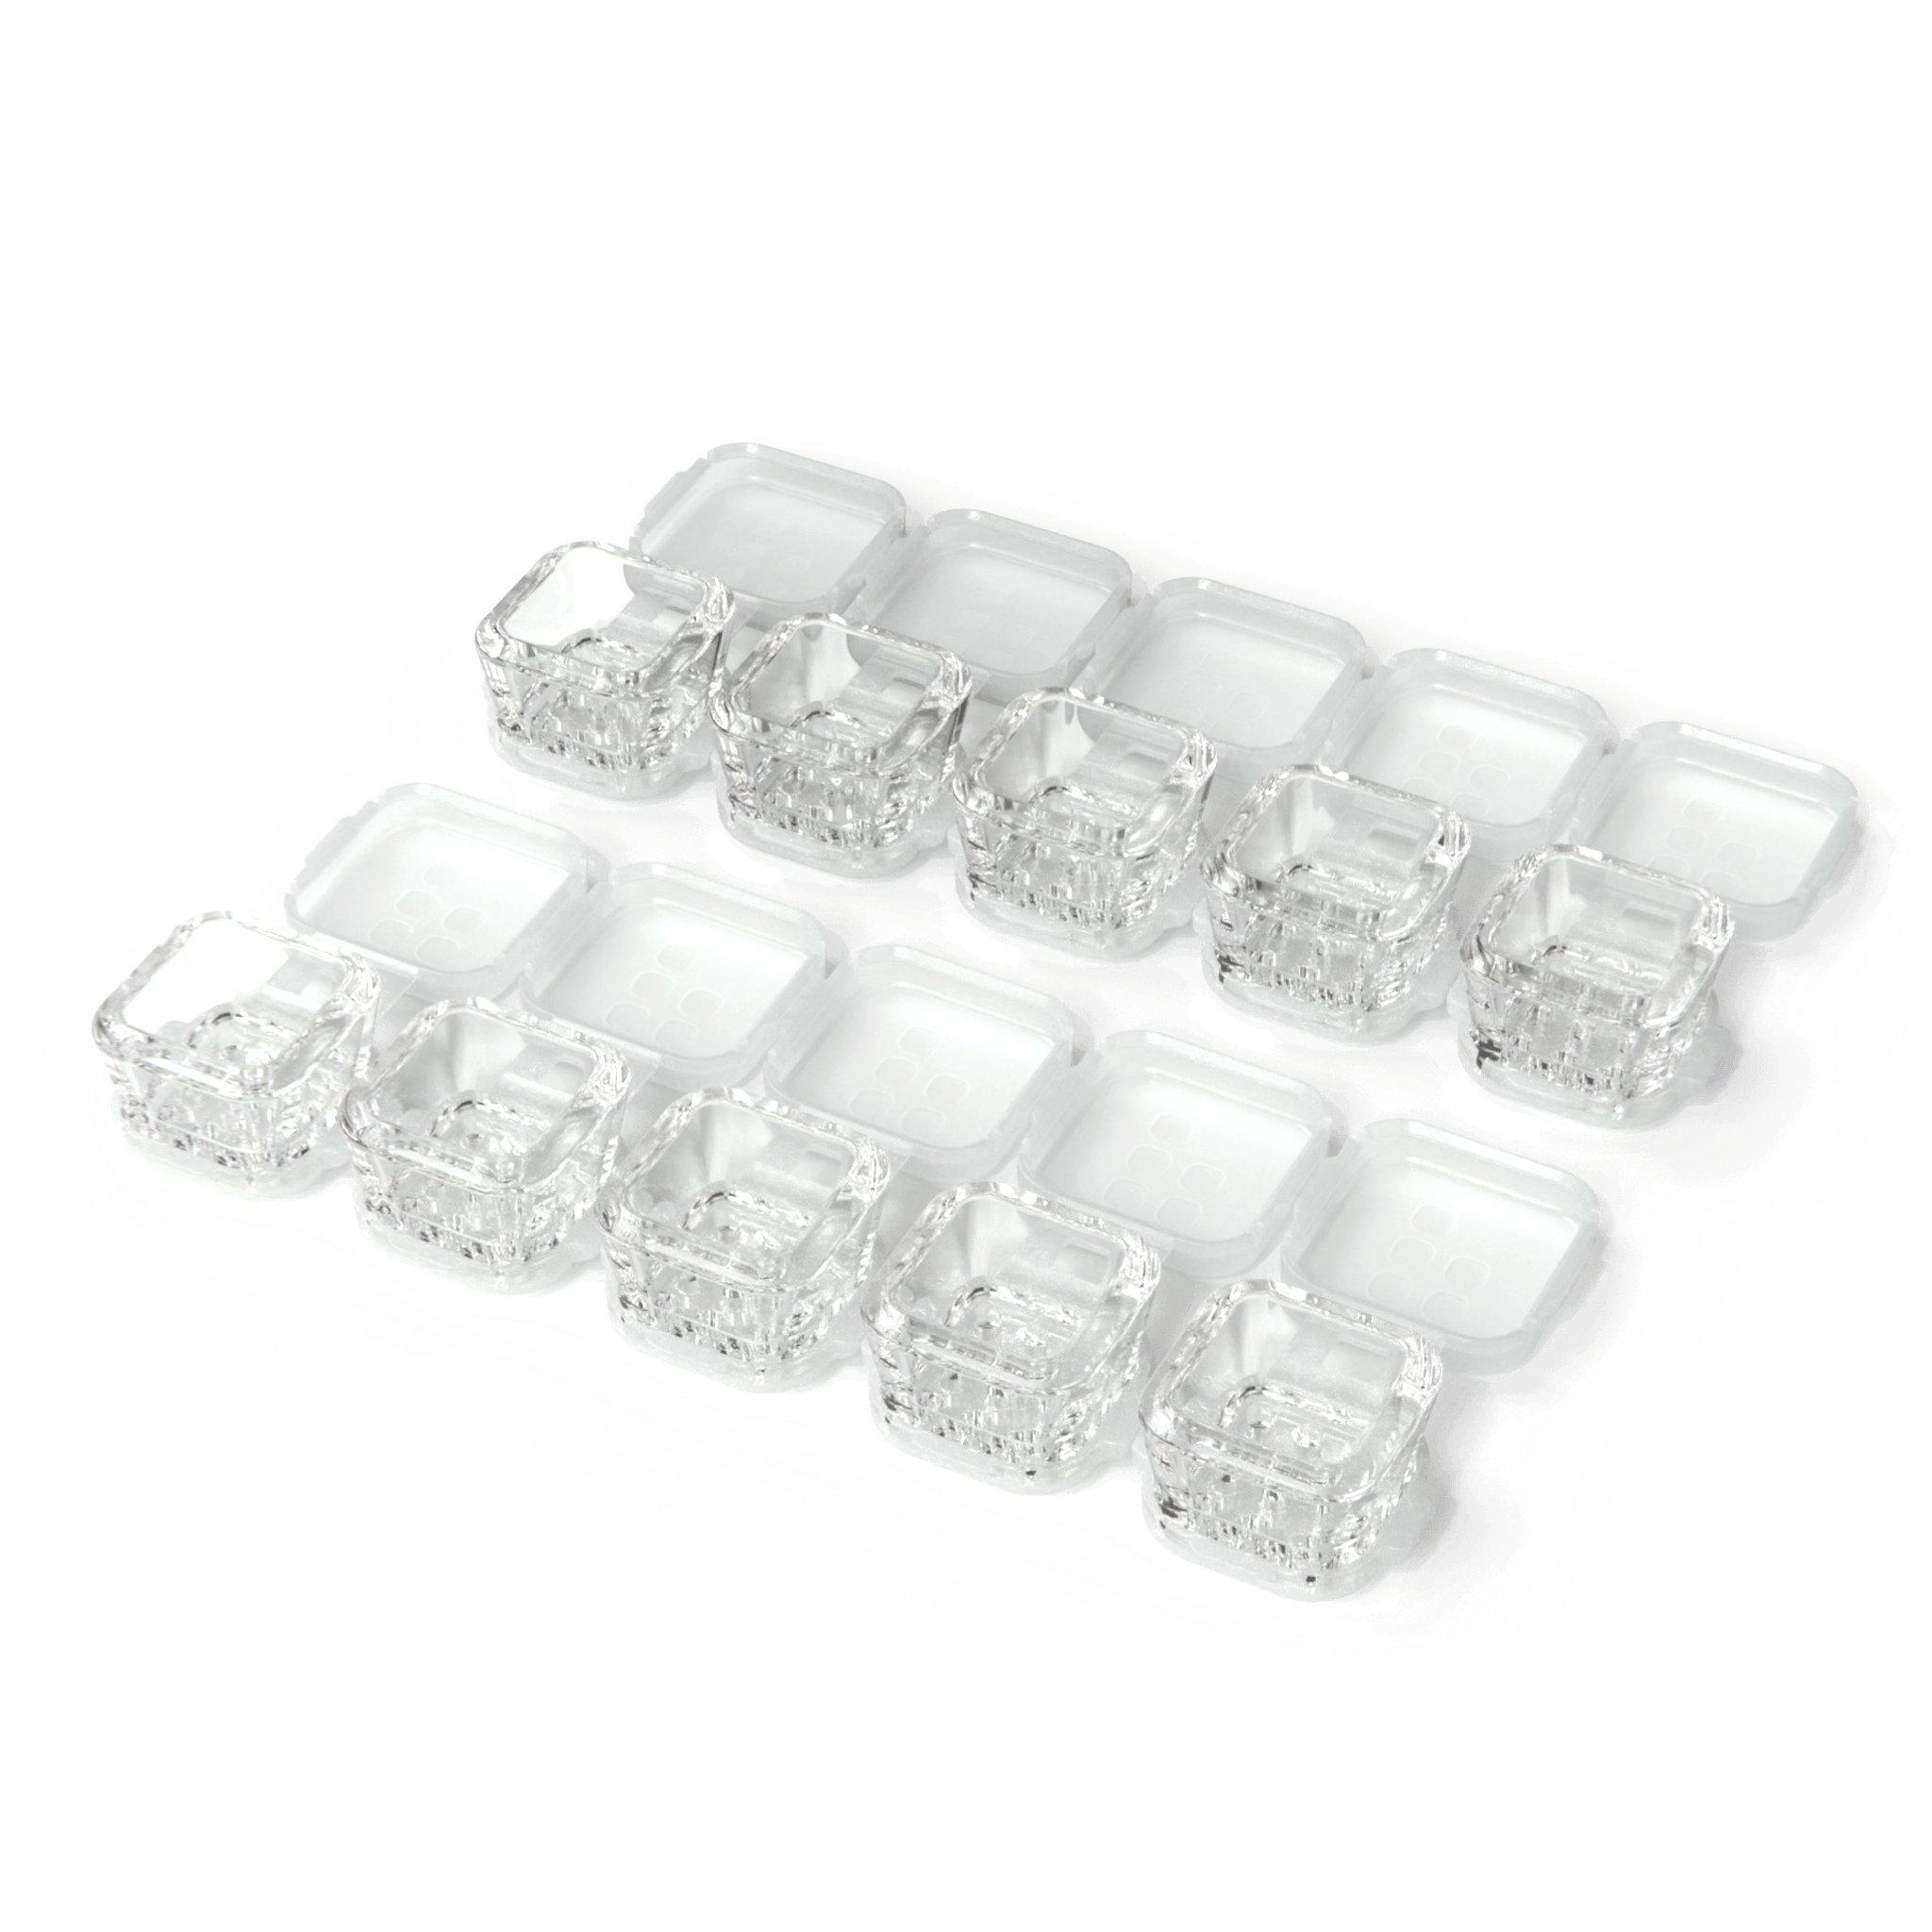 Pods (10 or 30 Count)